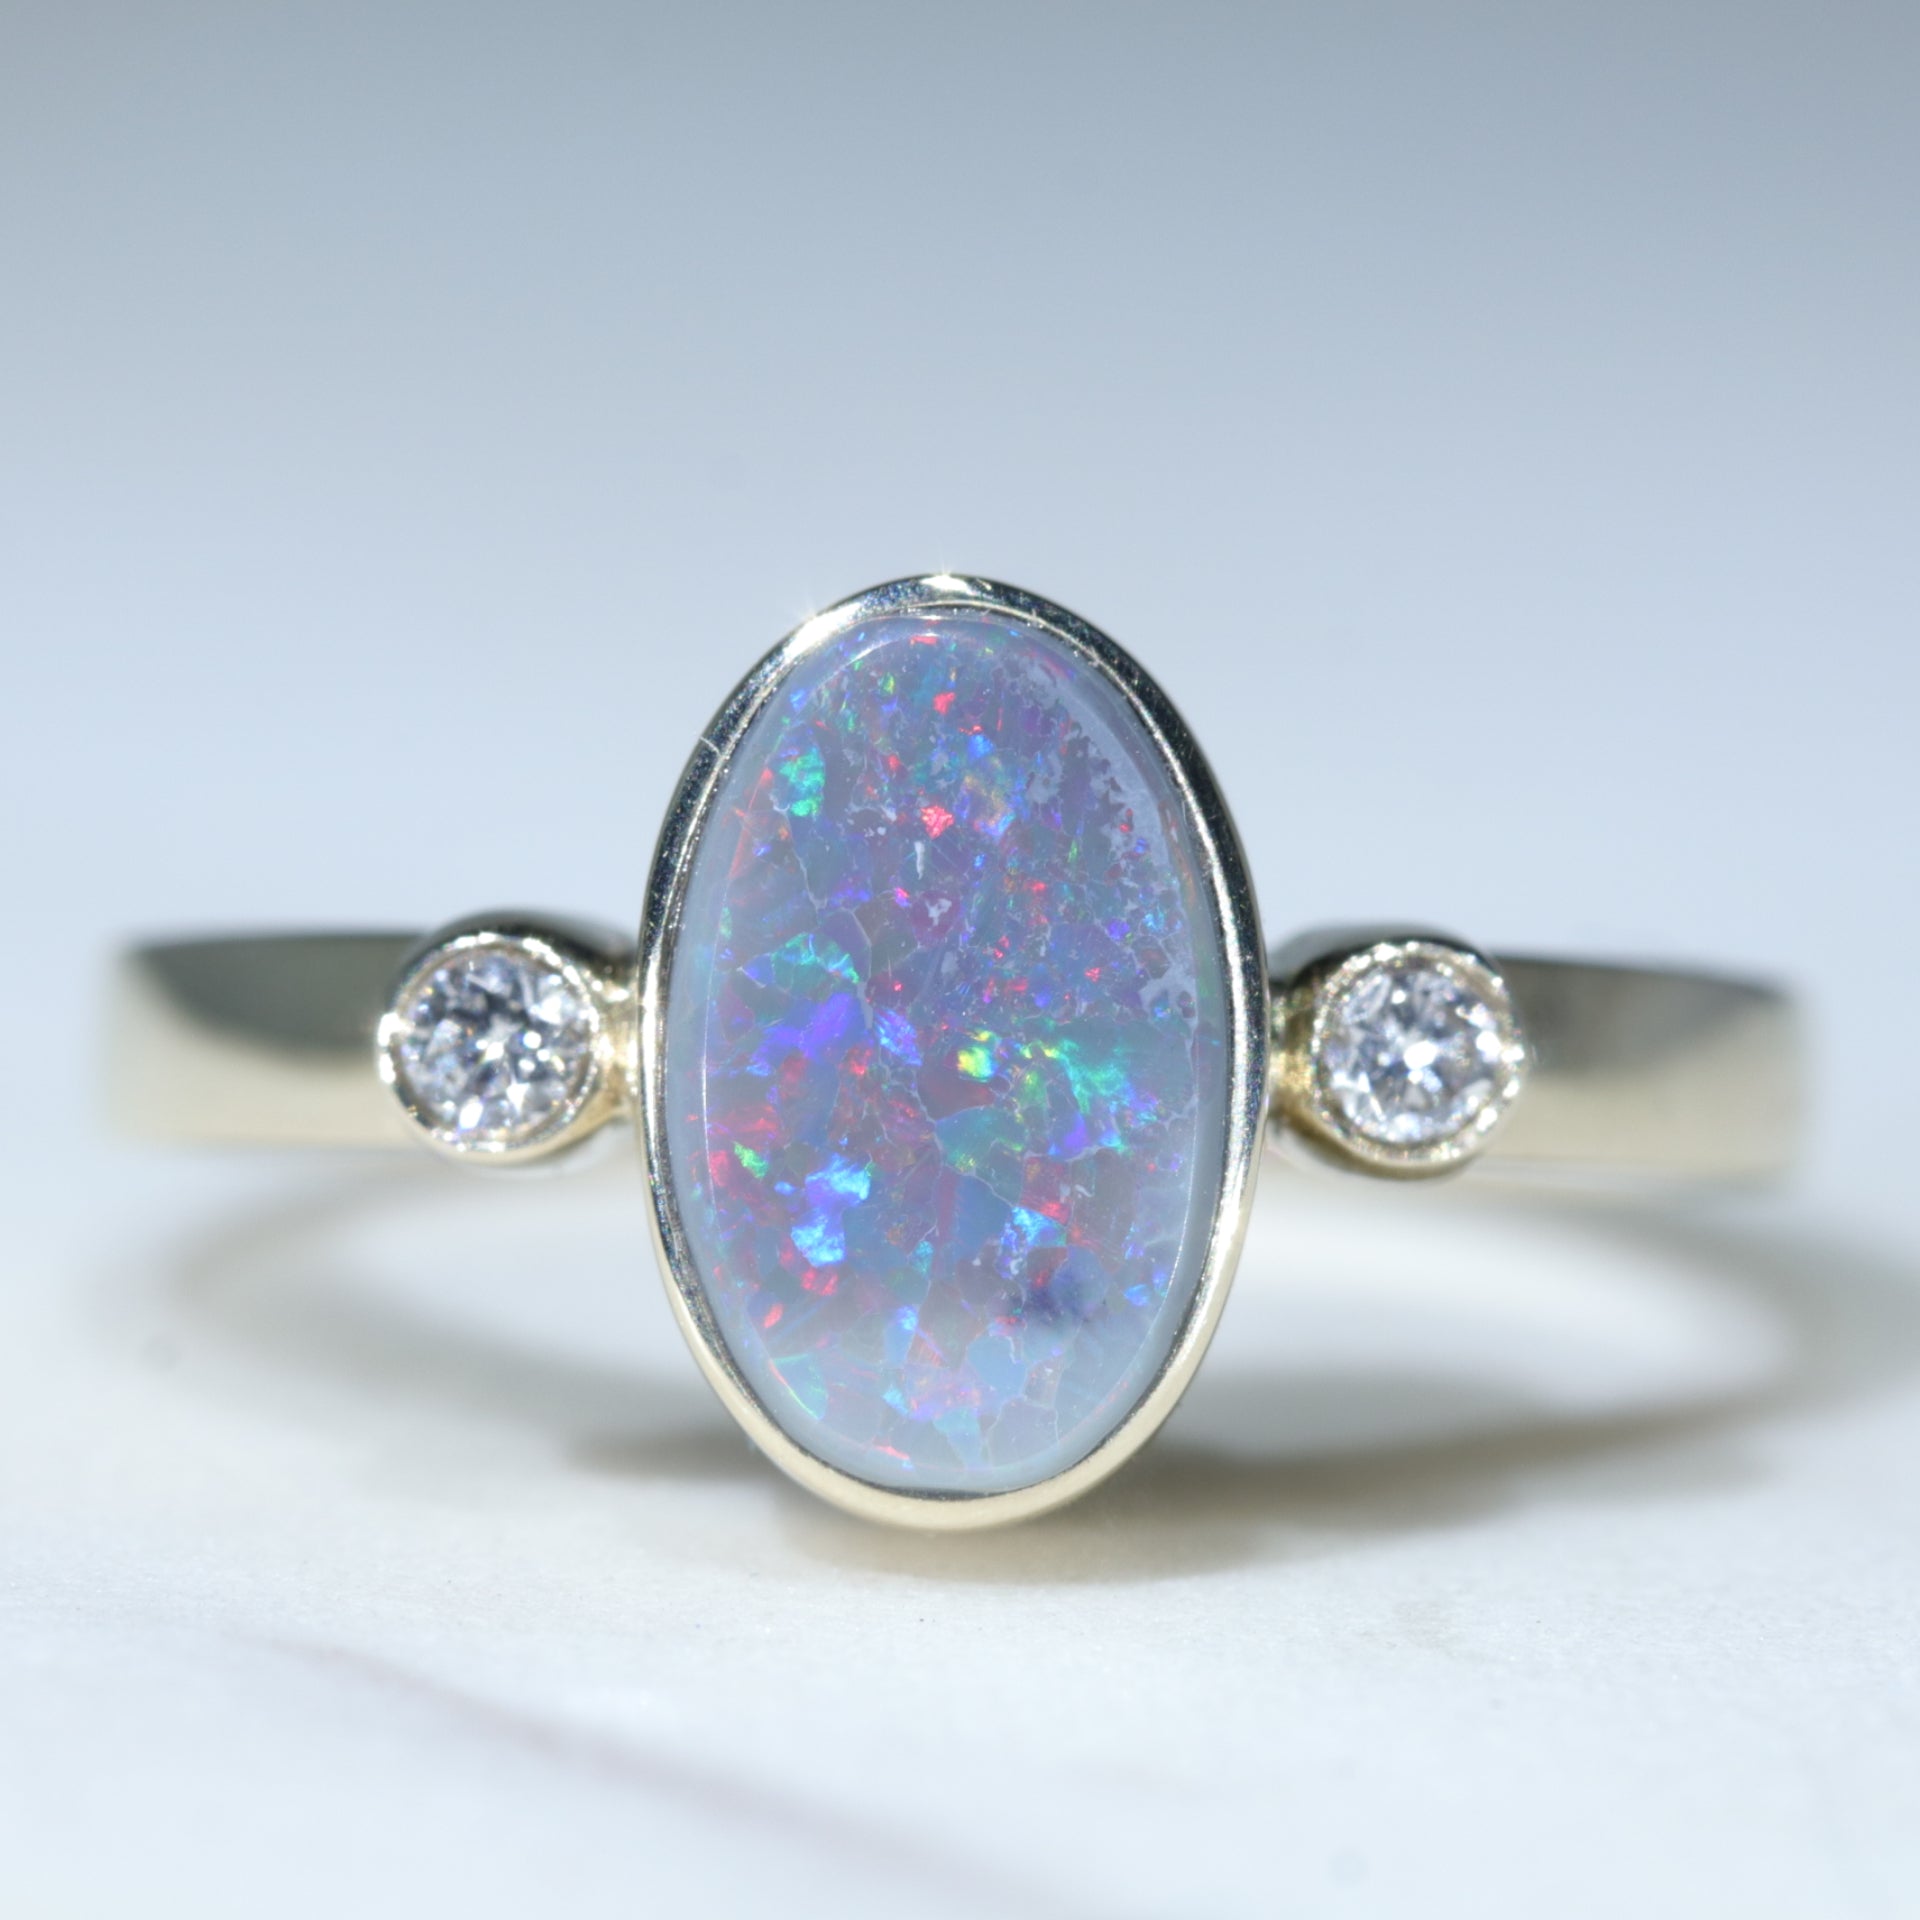 Natural Raw Fire Opal Ring, Ethiopian Opal Ring, Rough Opal Jewelry,  Electroplated Ring, Australian Opal Ring, Handmade Ring, Ring for Women -  Etsy | Rough opal jewelry, Raw opal ring, Fire opal ring